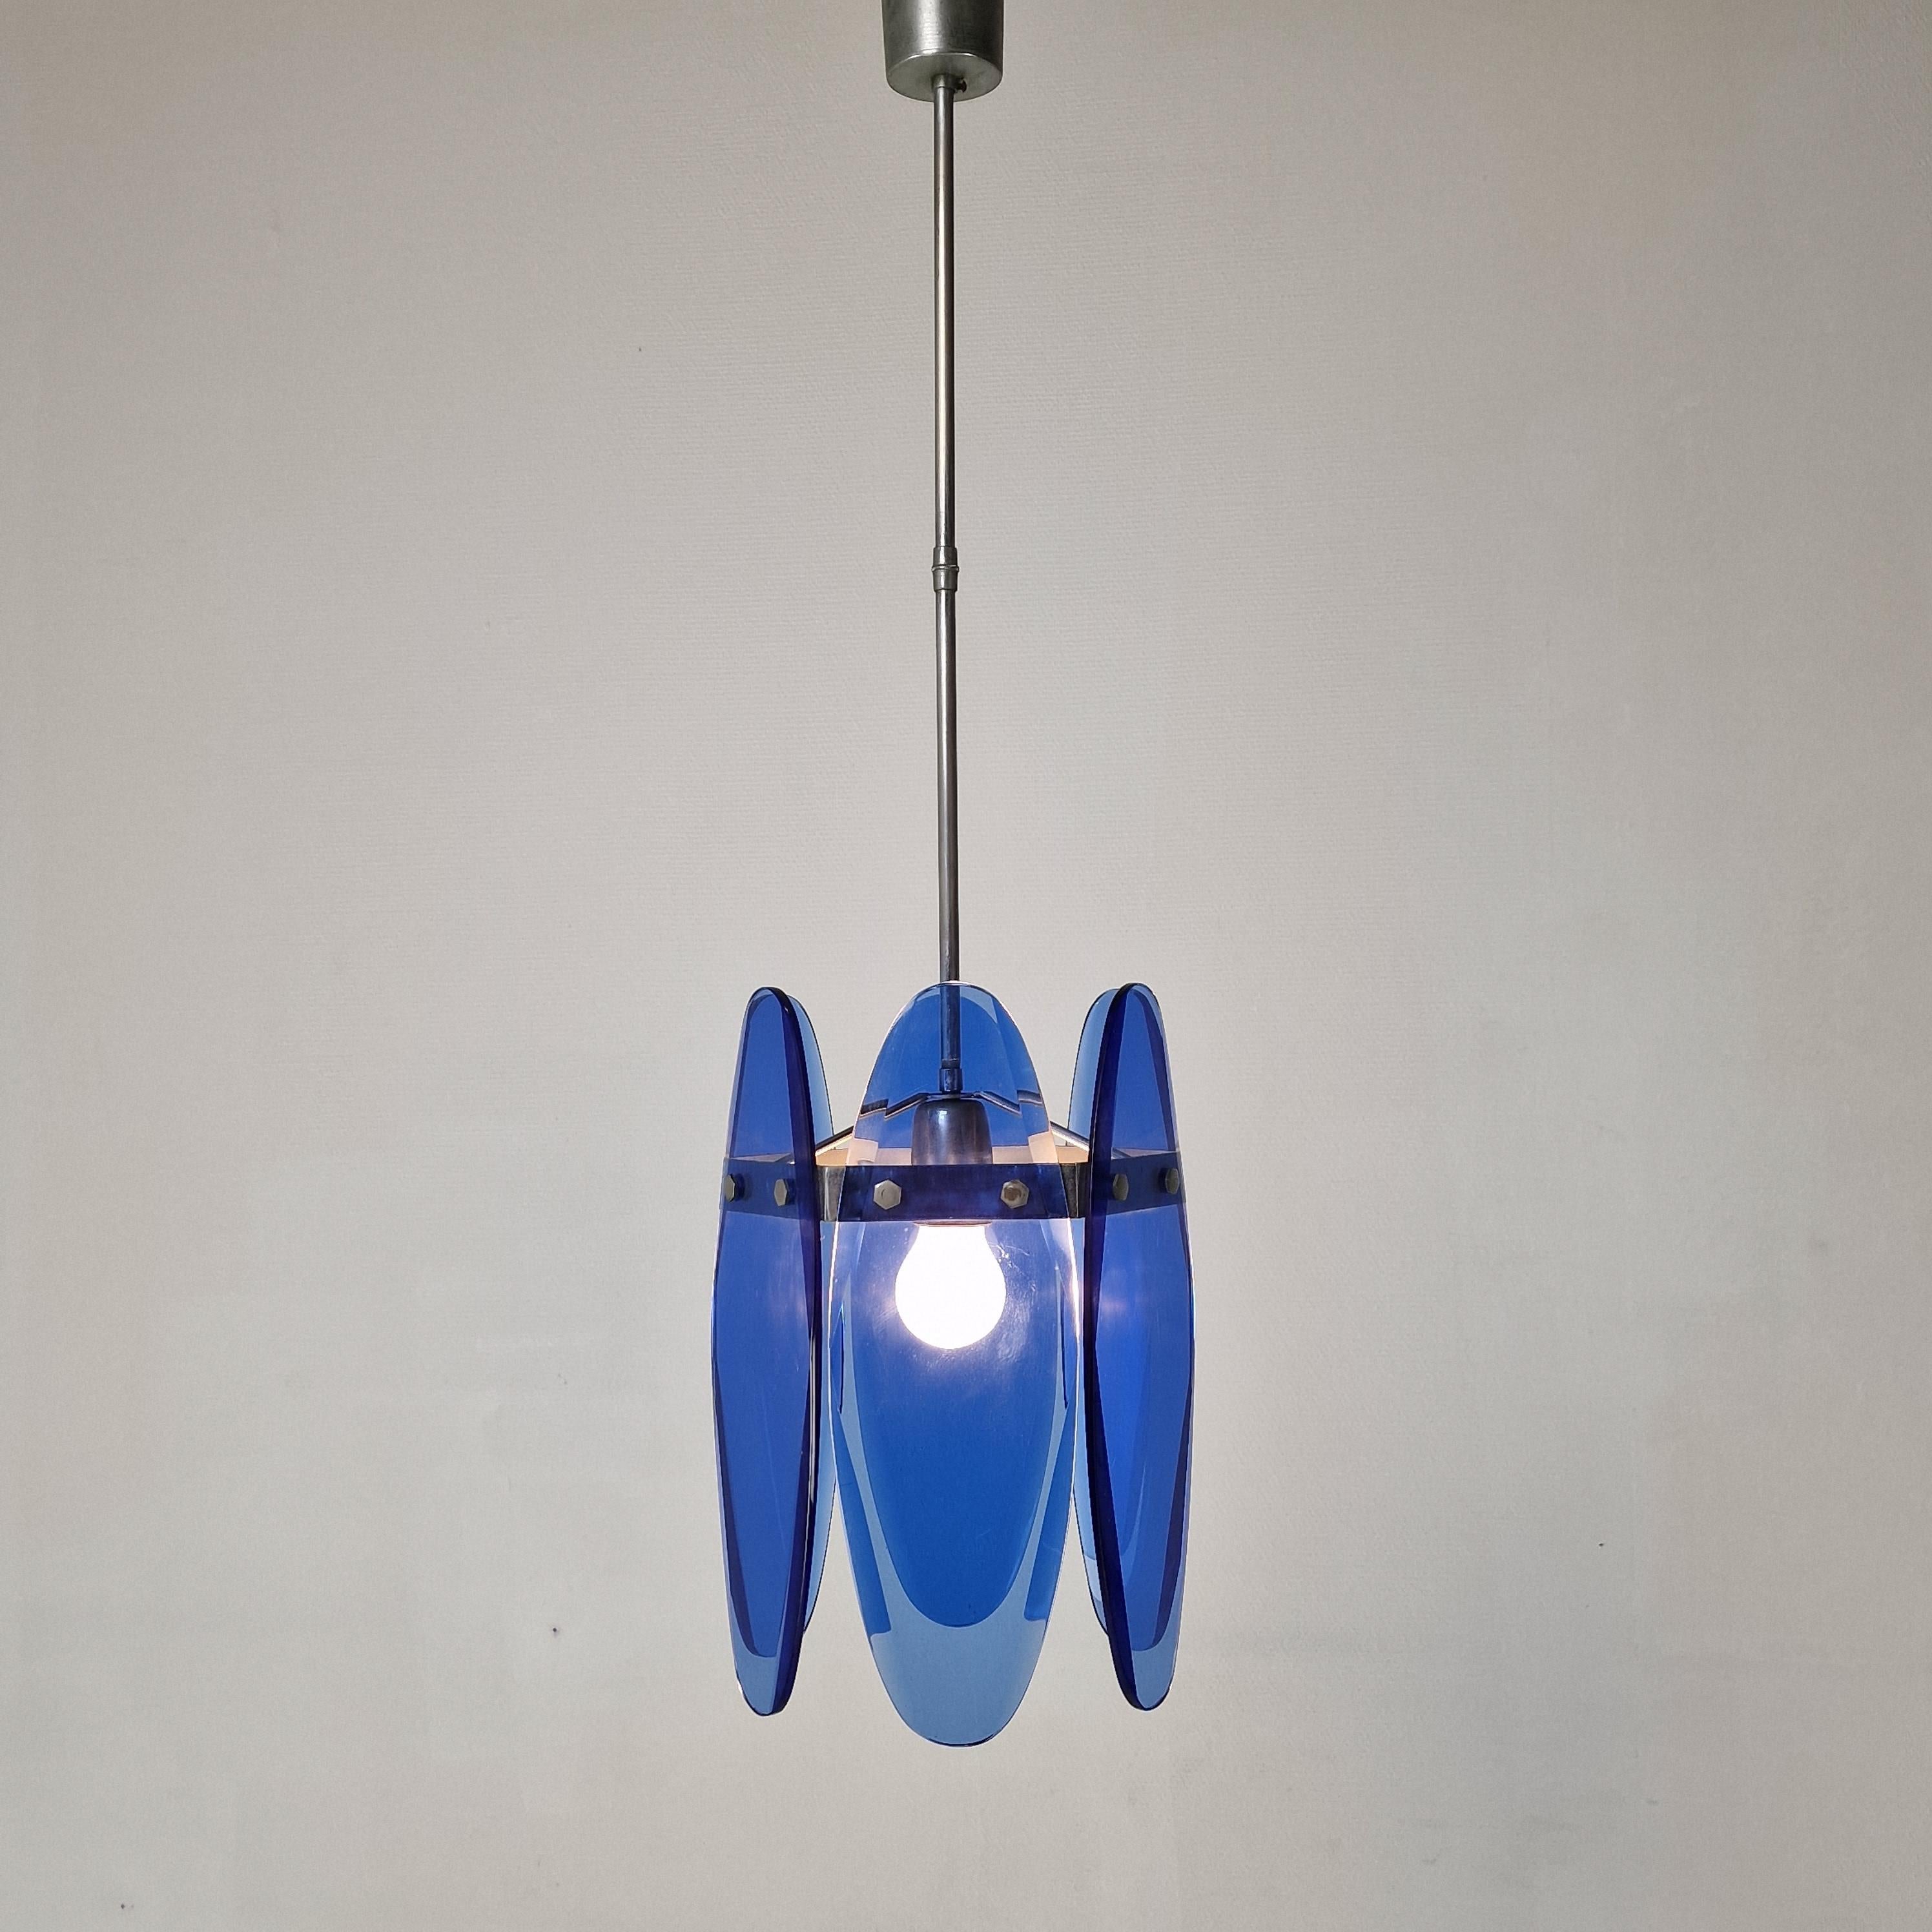 Mid-Century Modern Blue Glass Chandelier or Pendant by Veca, Italy 1970's For Sale 1